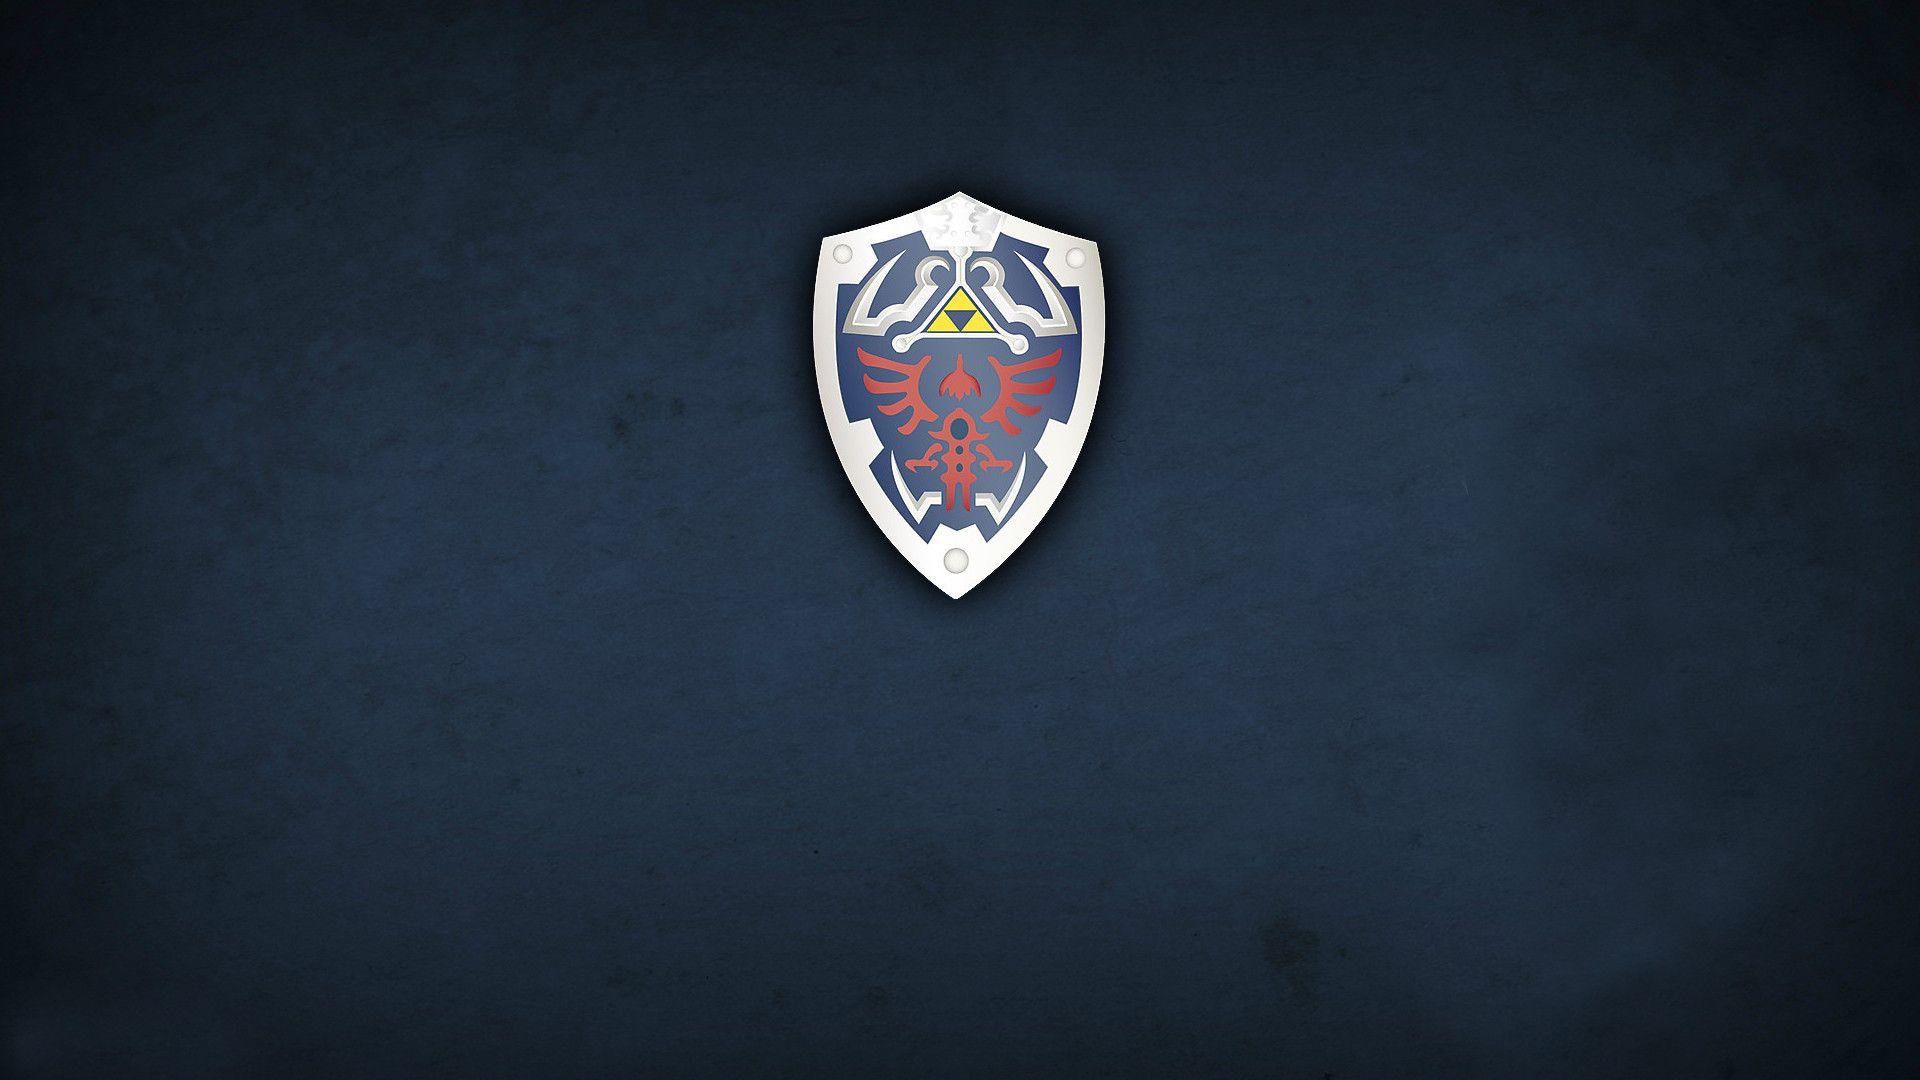 Been looking for a decent Hylian shield wallpaper for a while